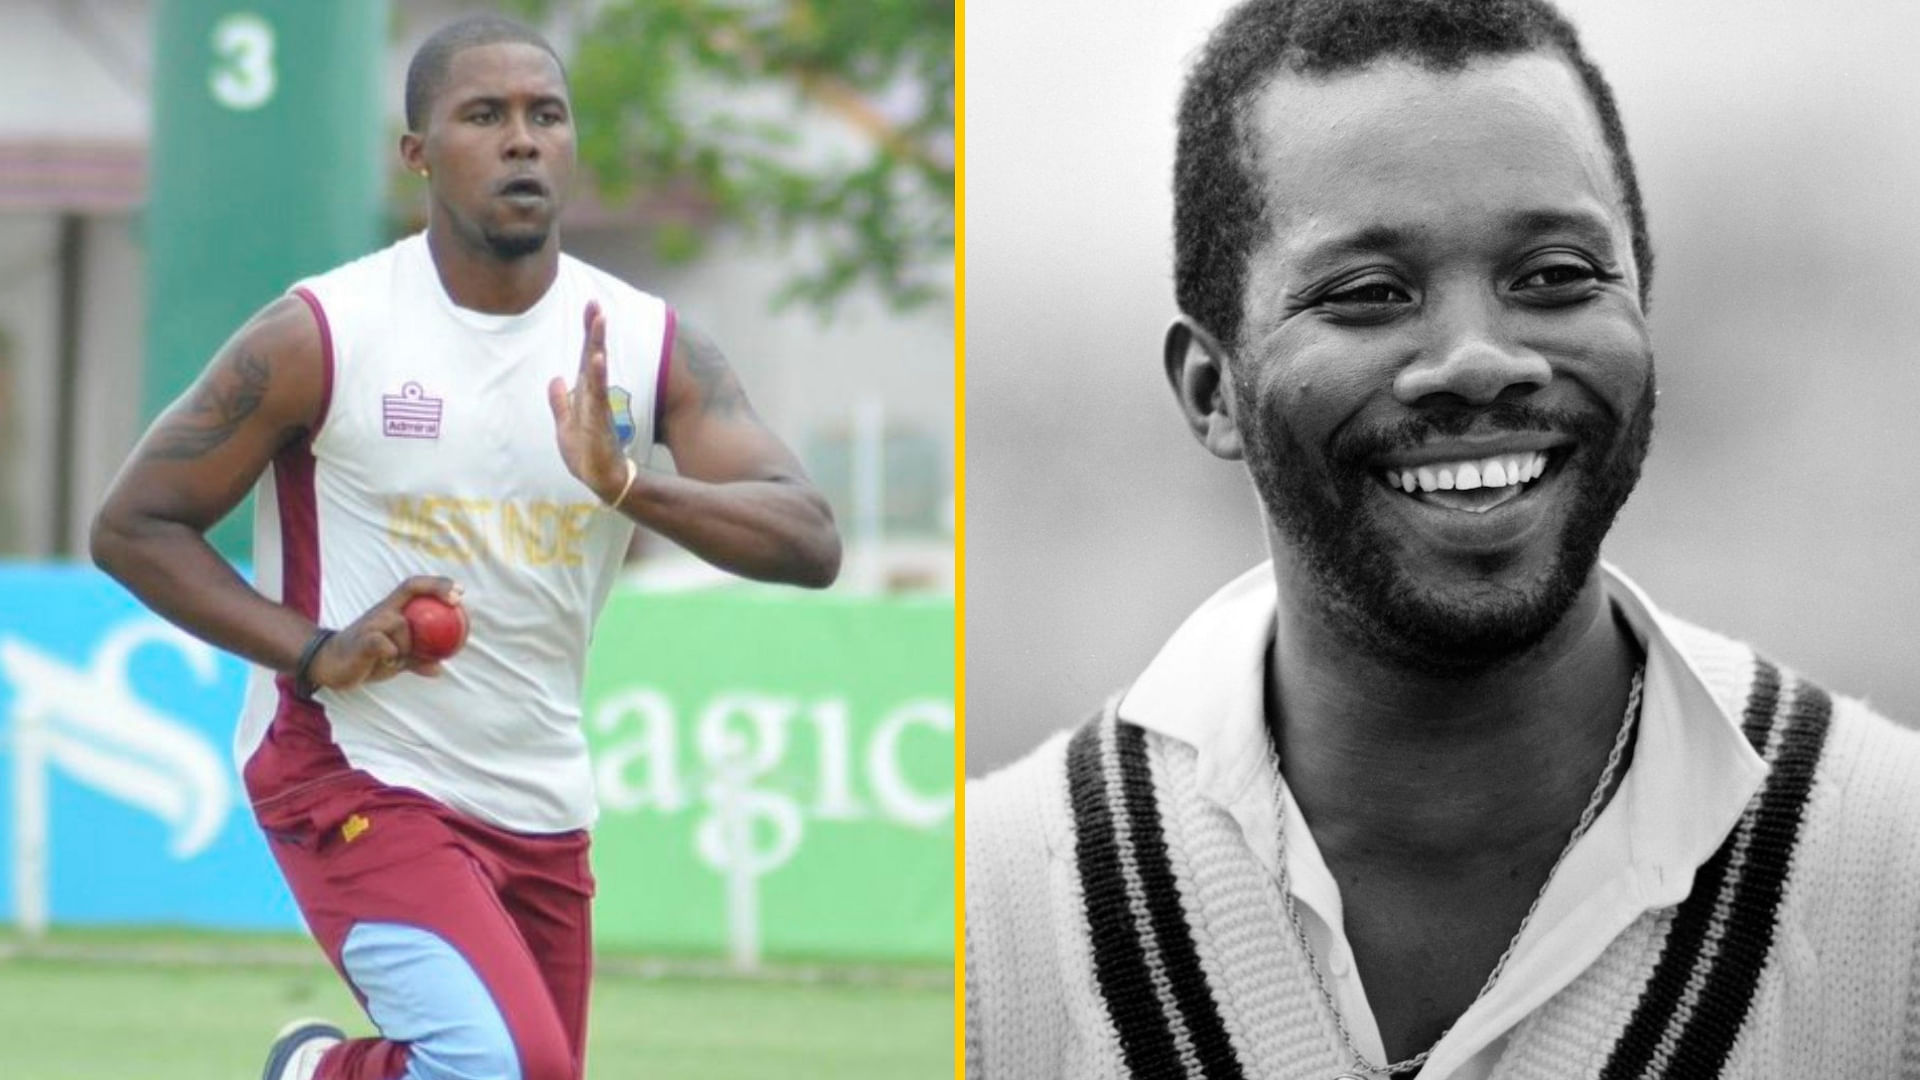 Mali Marshall will play the role of his father, West Indies bowler Malcolm Marshall, in <i>83</i>.